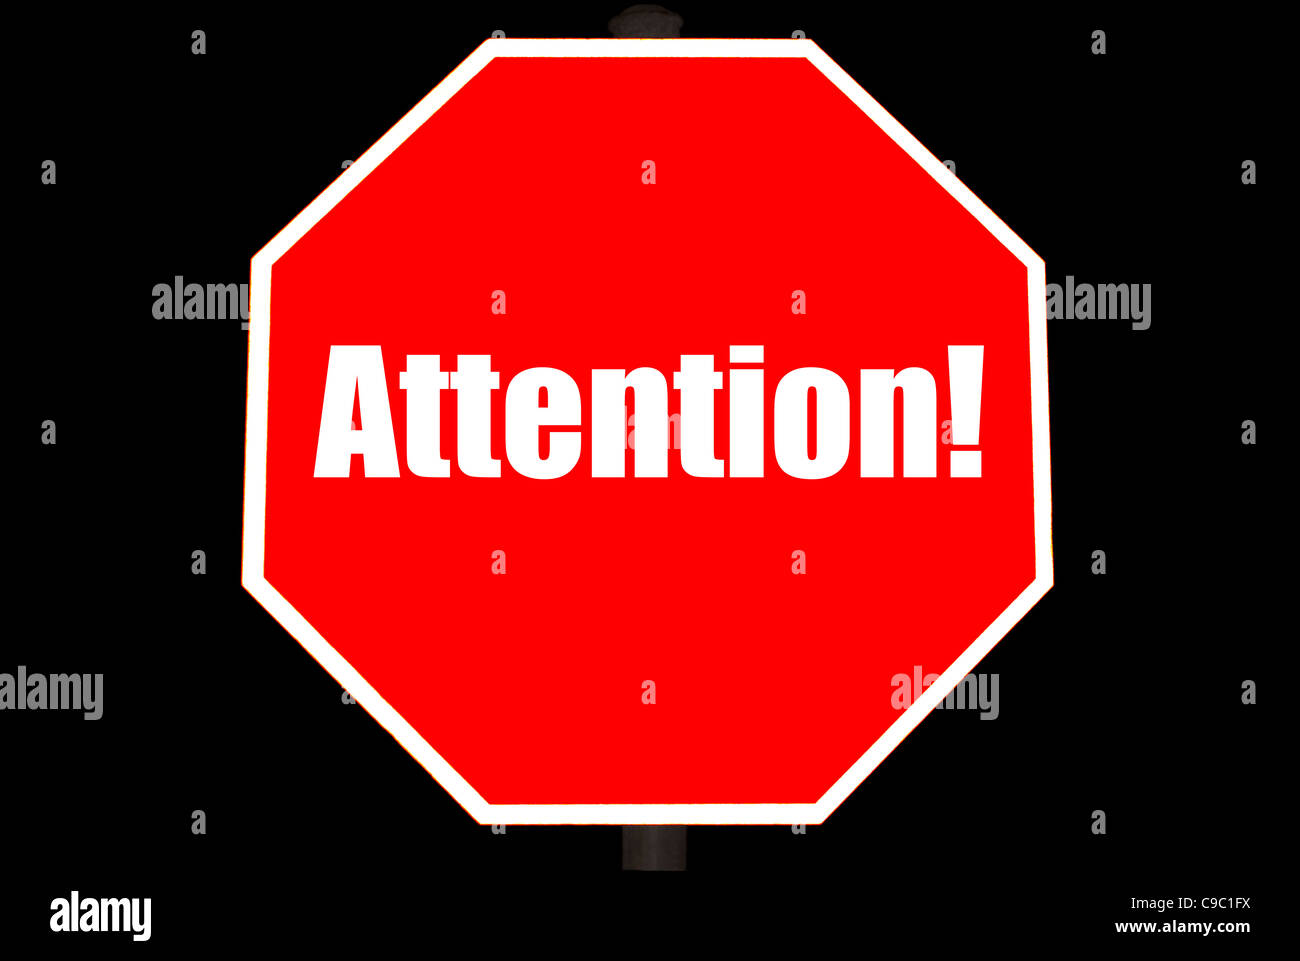 Attention Concept On A Bright Red Stop Sign Isolated On Black Stock Photo